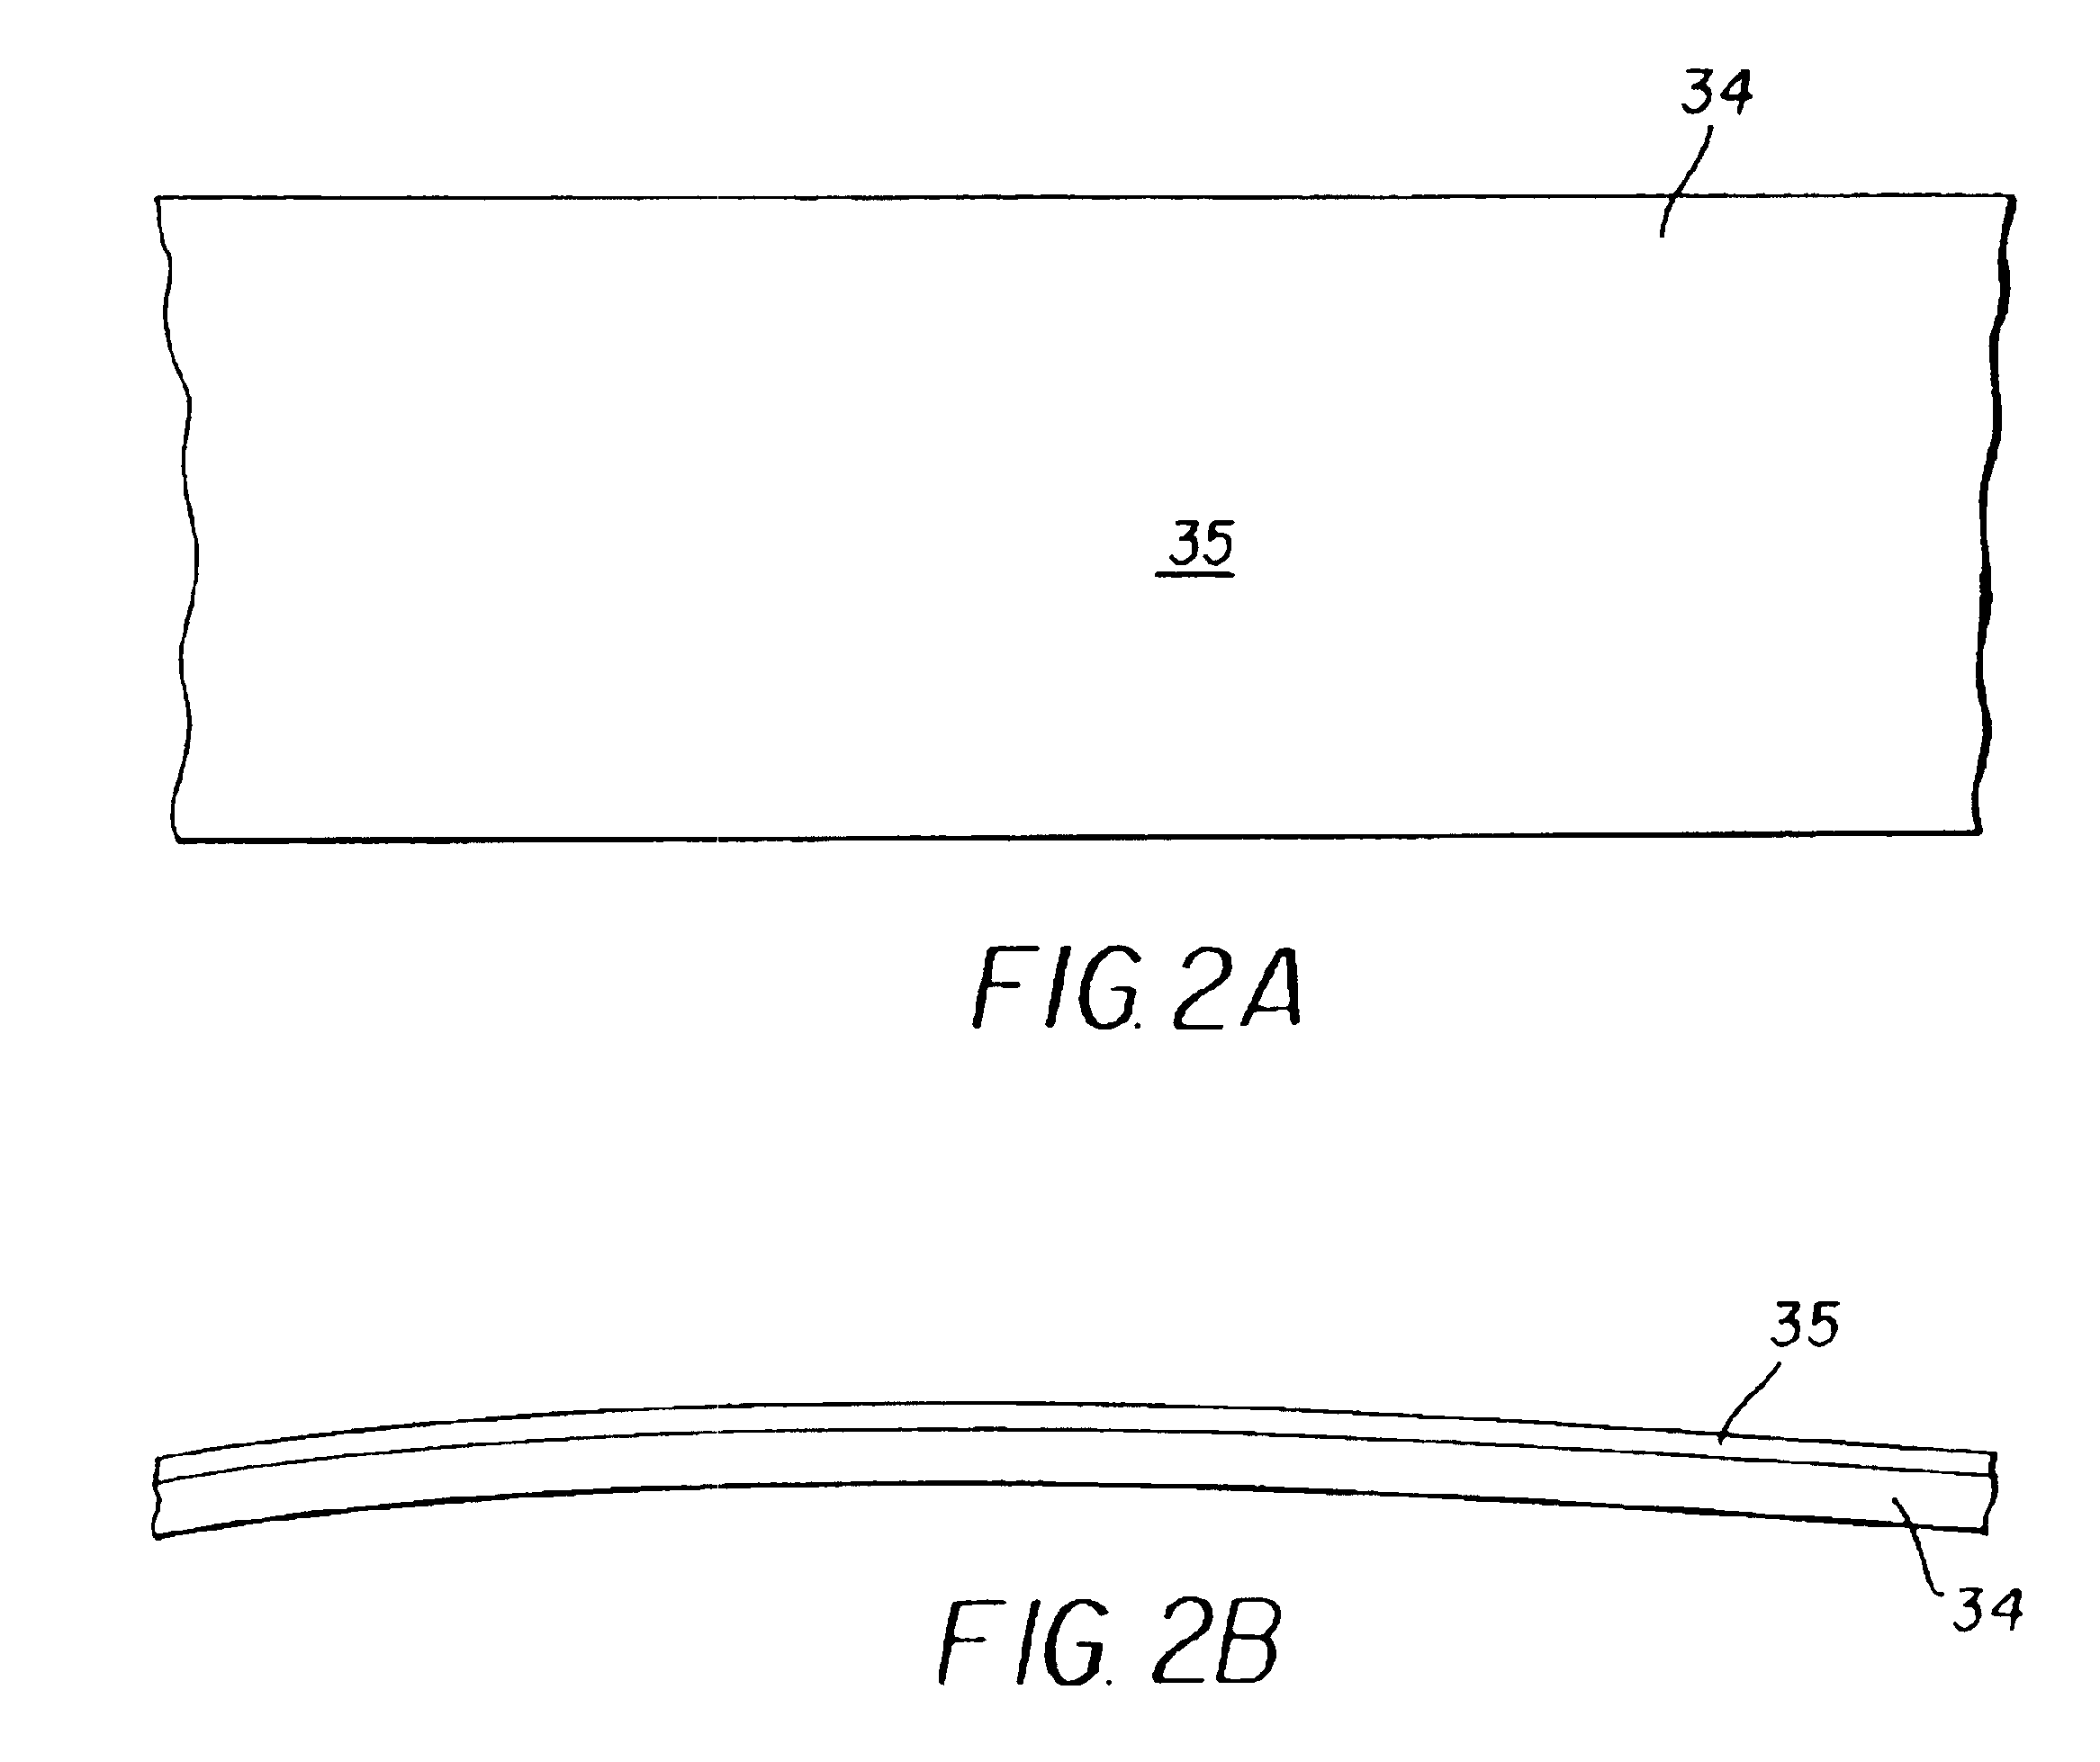 Apparatus and method for encapsulating an OLED formed on a flexible substrate